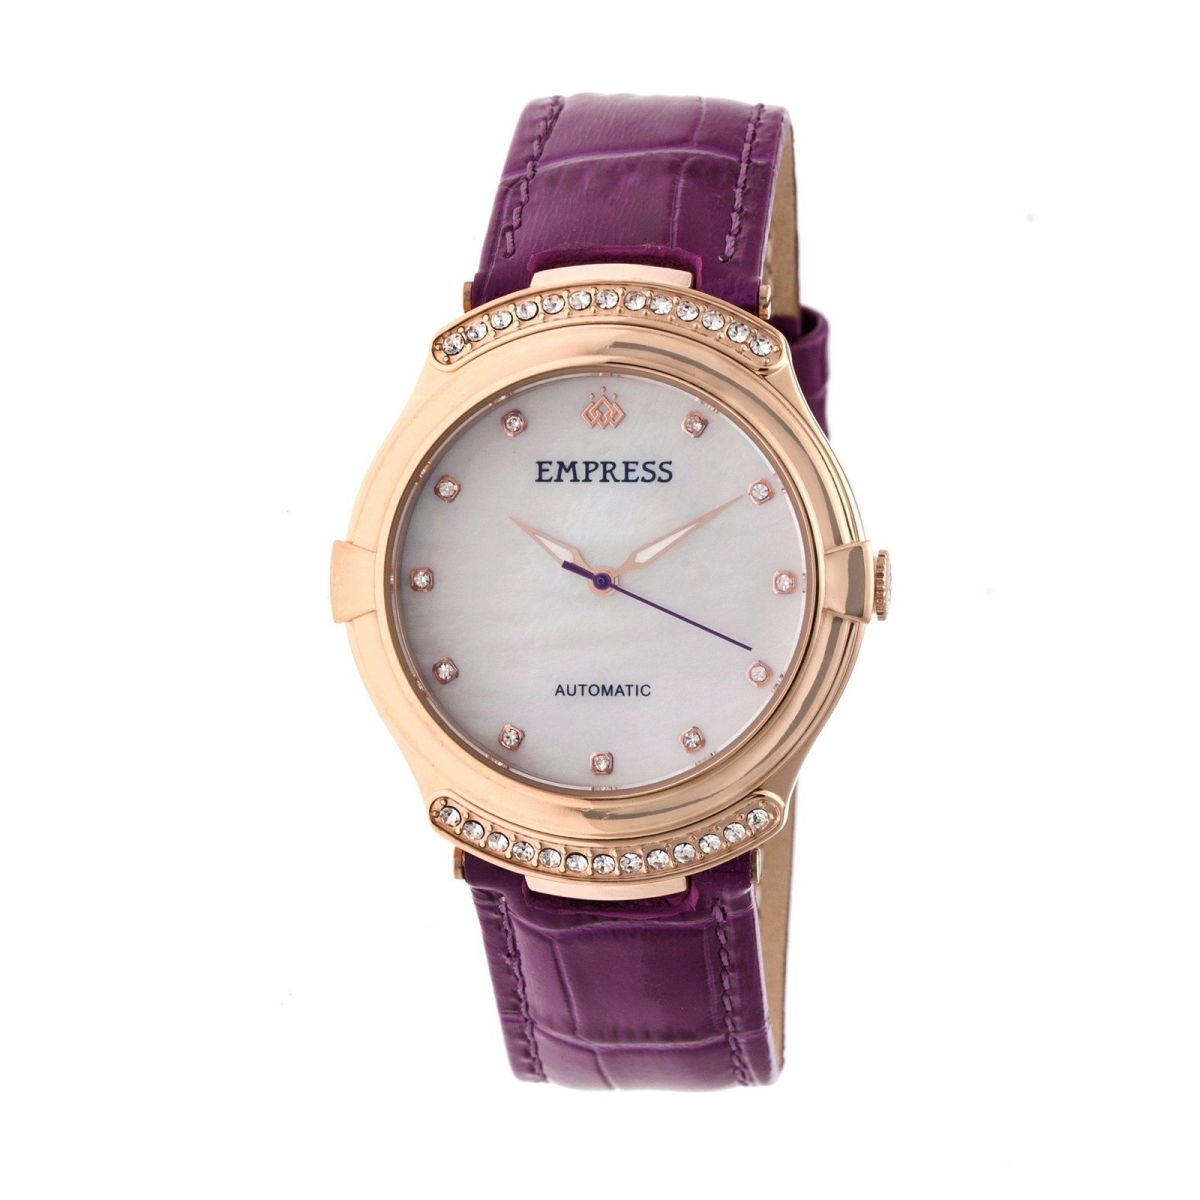 EMPRESS EMPEM2206 Francesca Womens Automatic Mother of Pearl Leather Band Watch - Fuschia